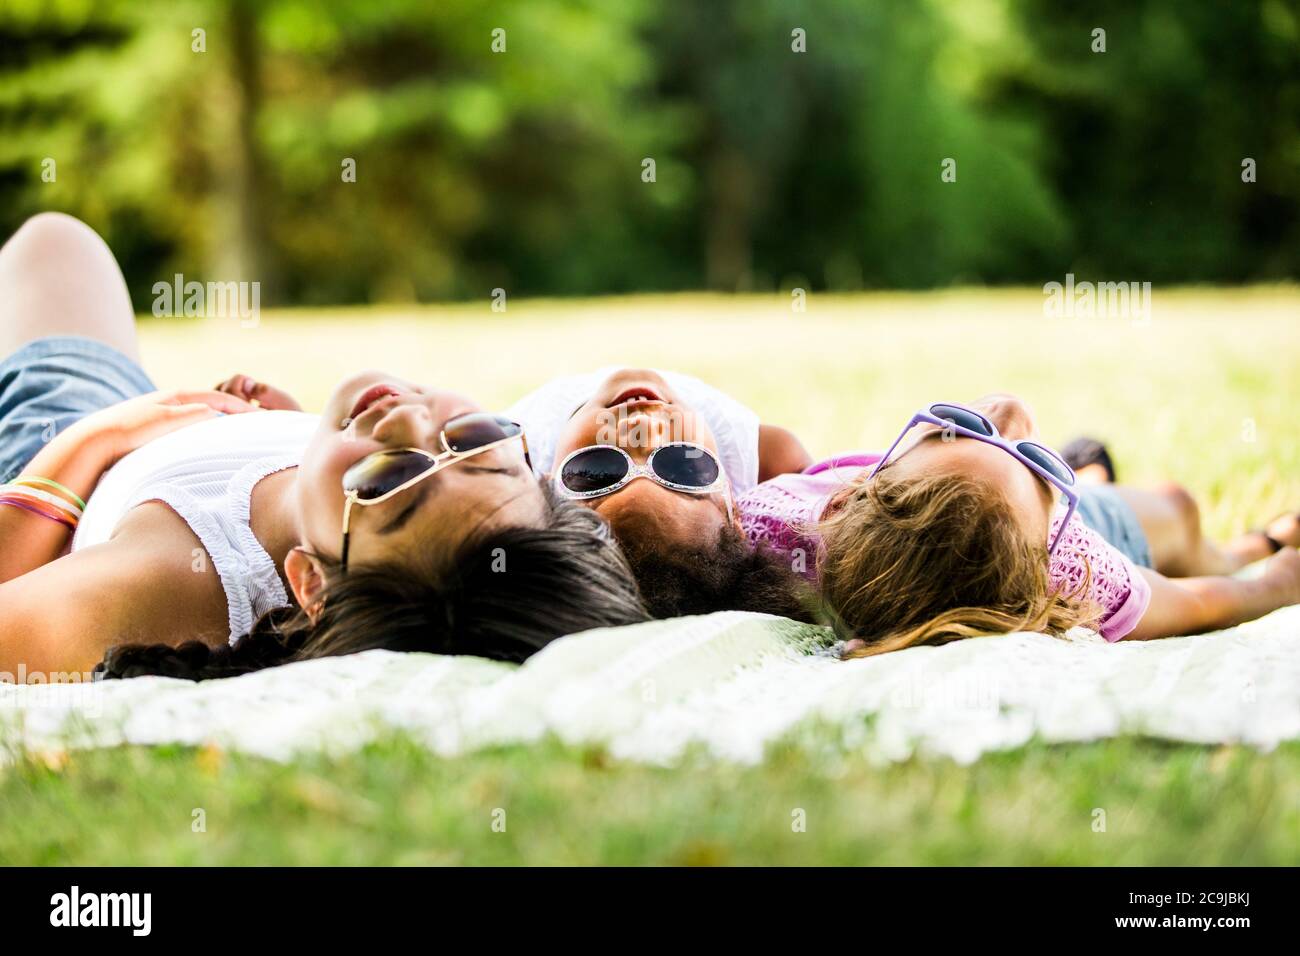 Girls wearing sunglasses and lying side by side on blanket in park. Stock Photo